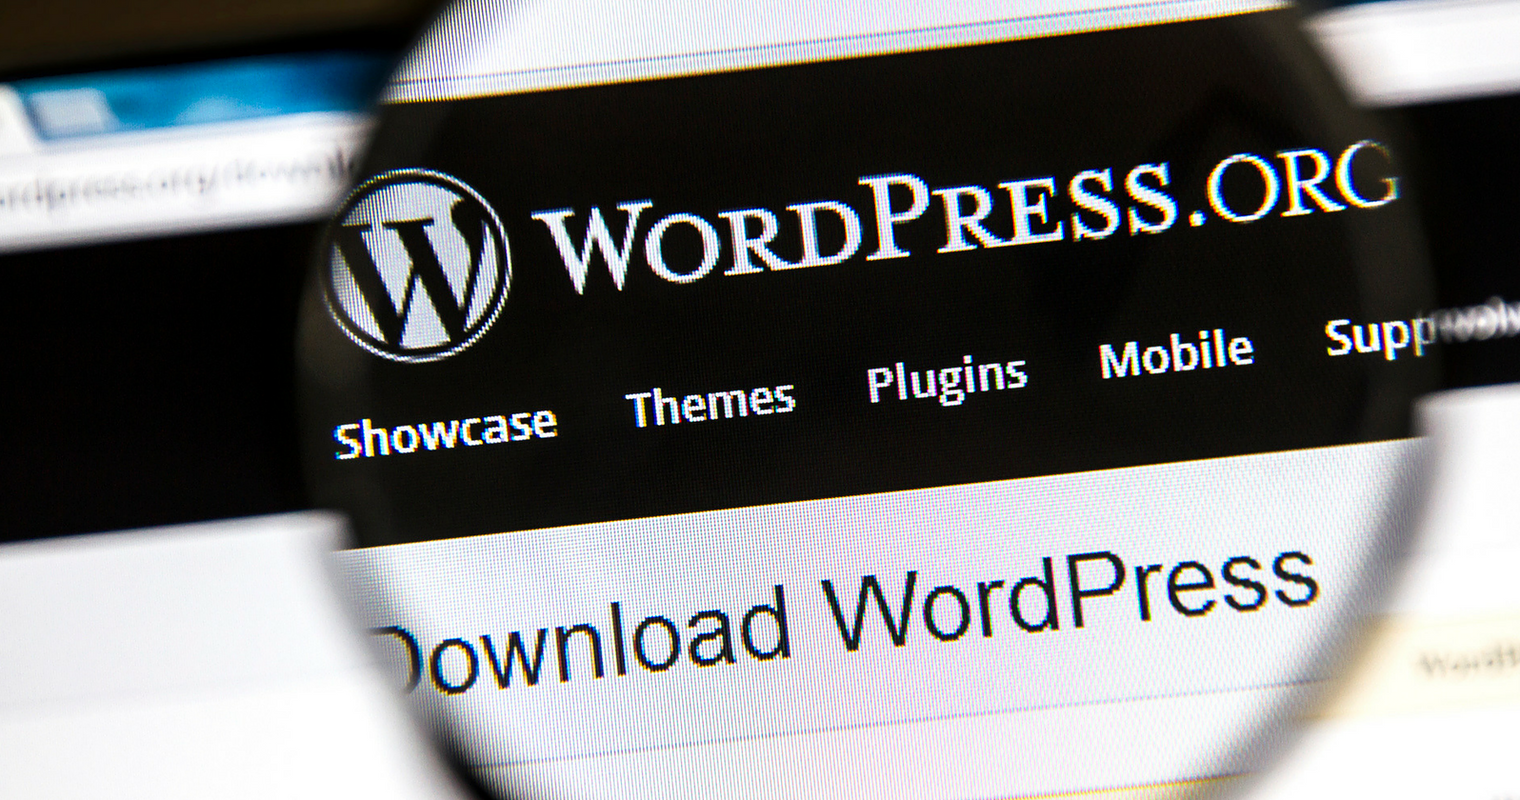 WordPress for Google Docs Lets Multiple Users Collaborate on Content in Real-Time